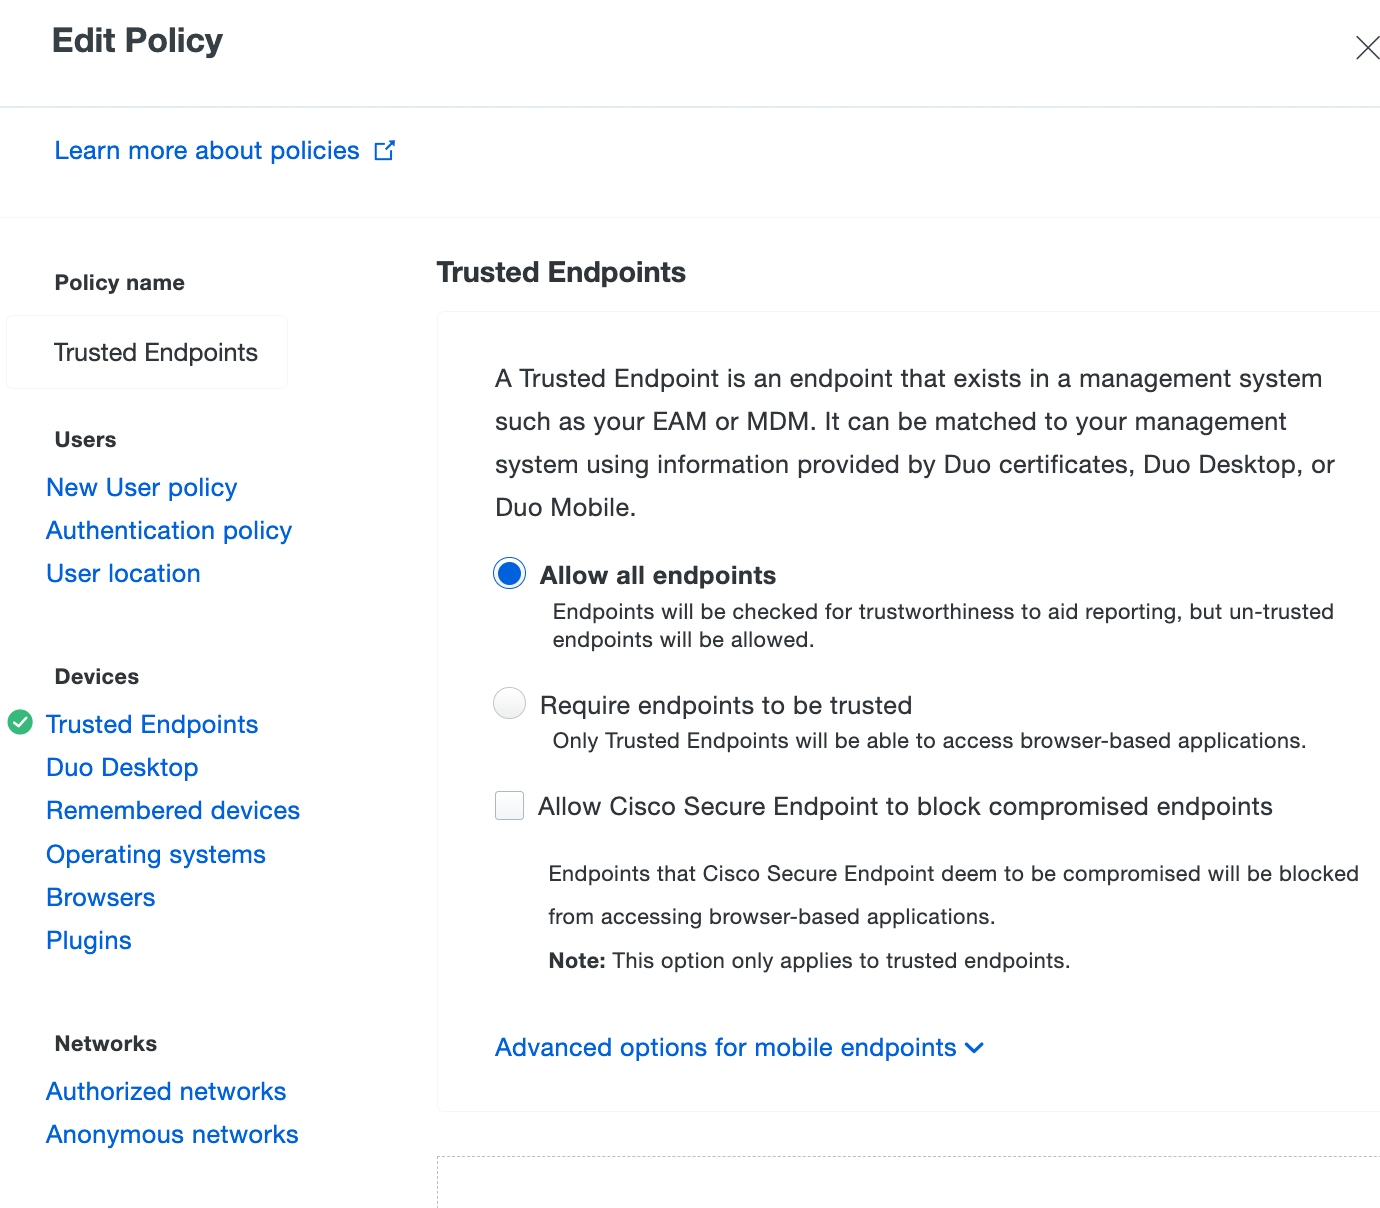 Creating the Trusted Endpoints Policy